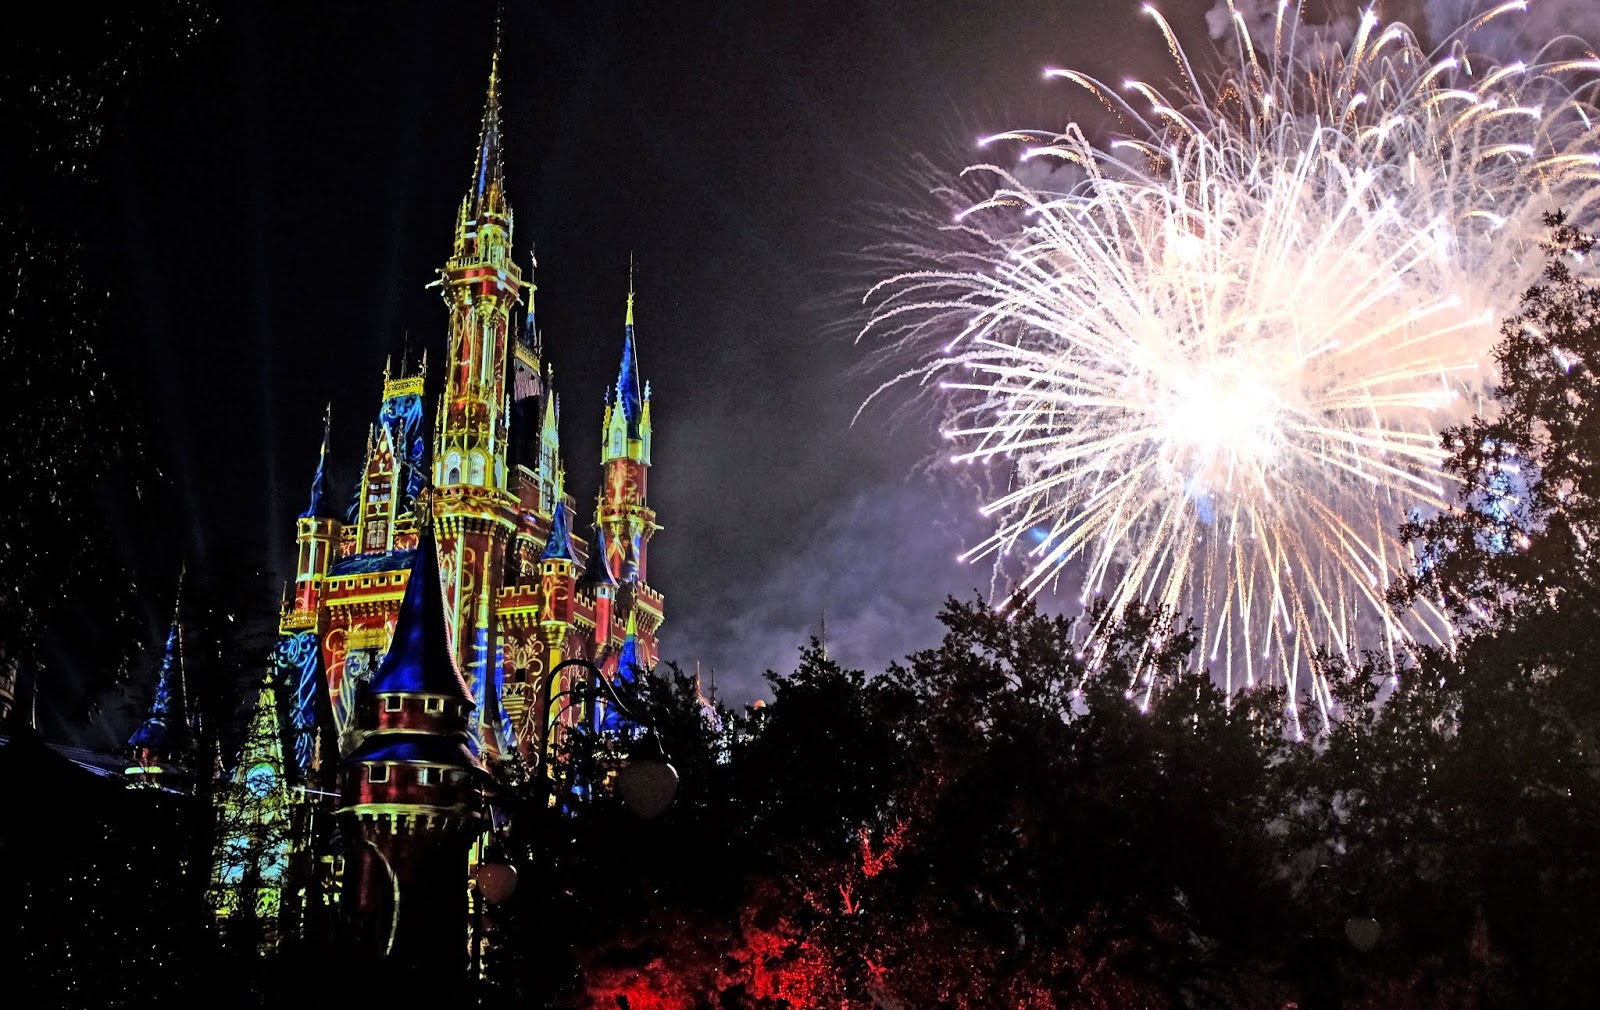 The Happily Ever After fireworks display at the Magic Kingdom, Walt Disney World